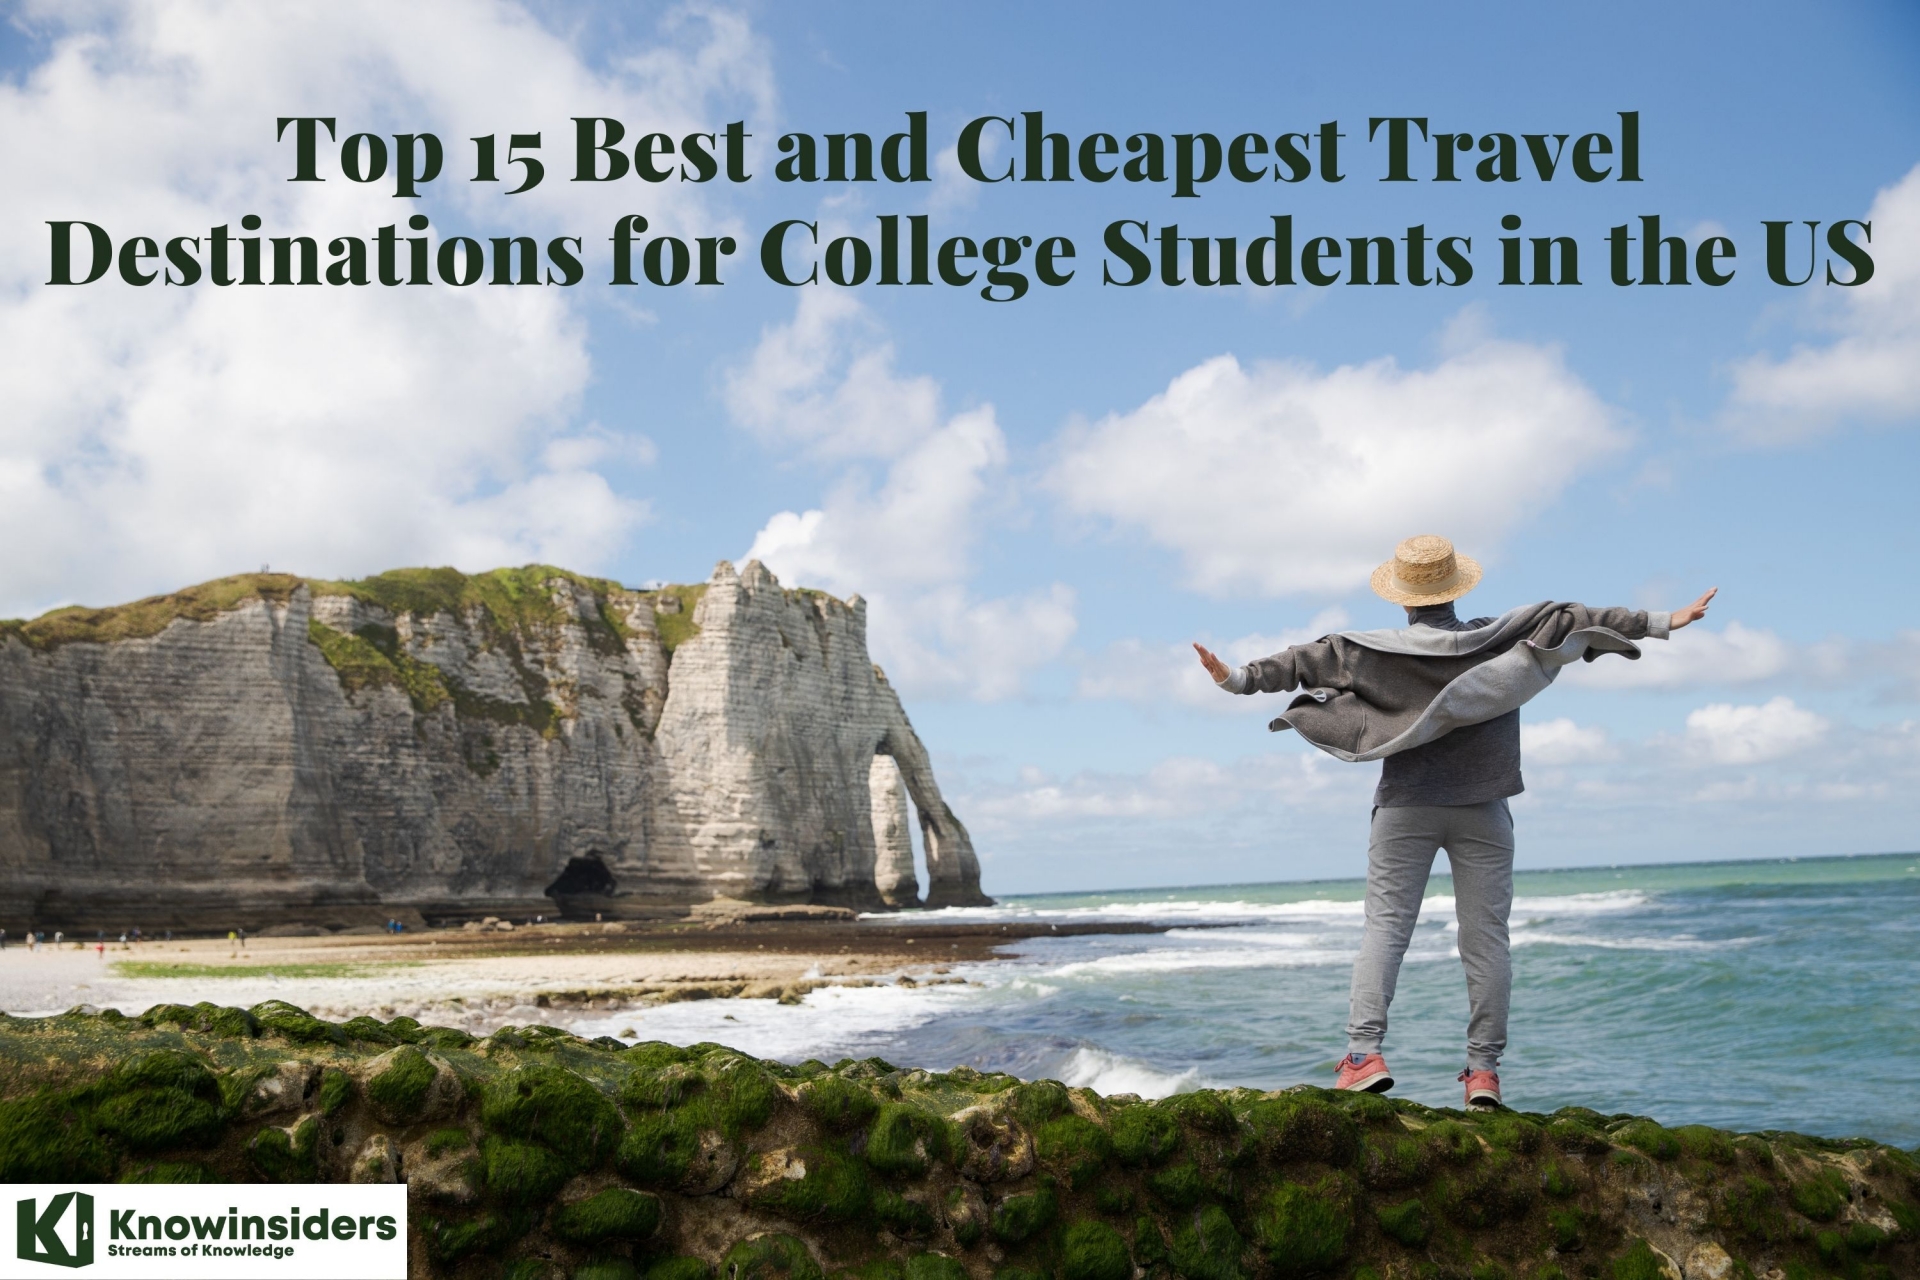 Top 15 Best and Cheapest Travel Destinations for College Students in the US